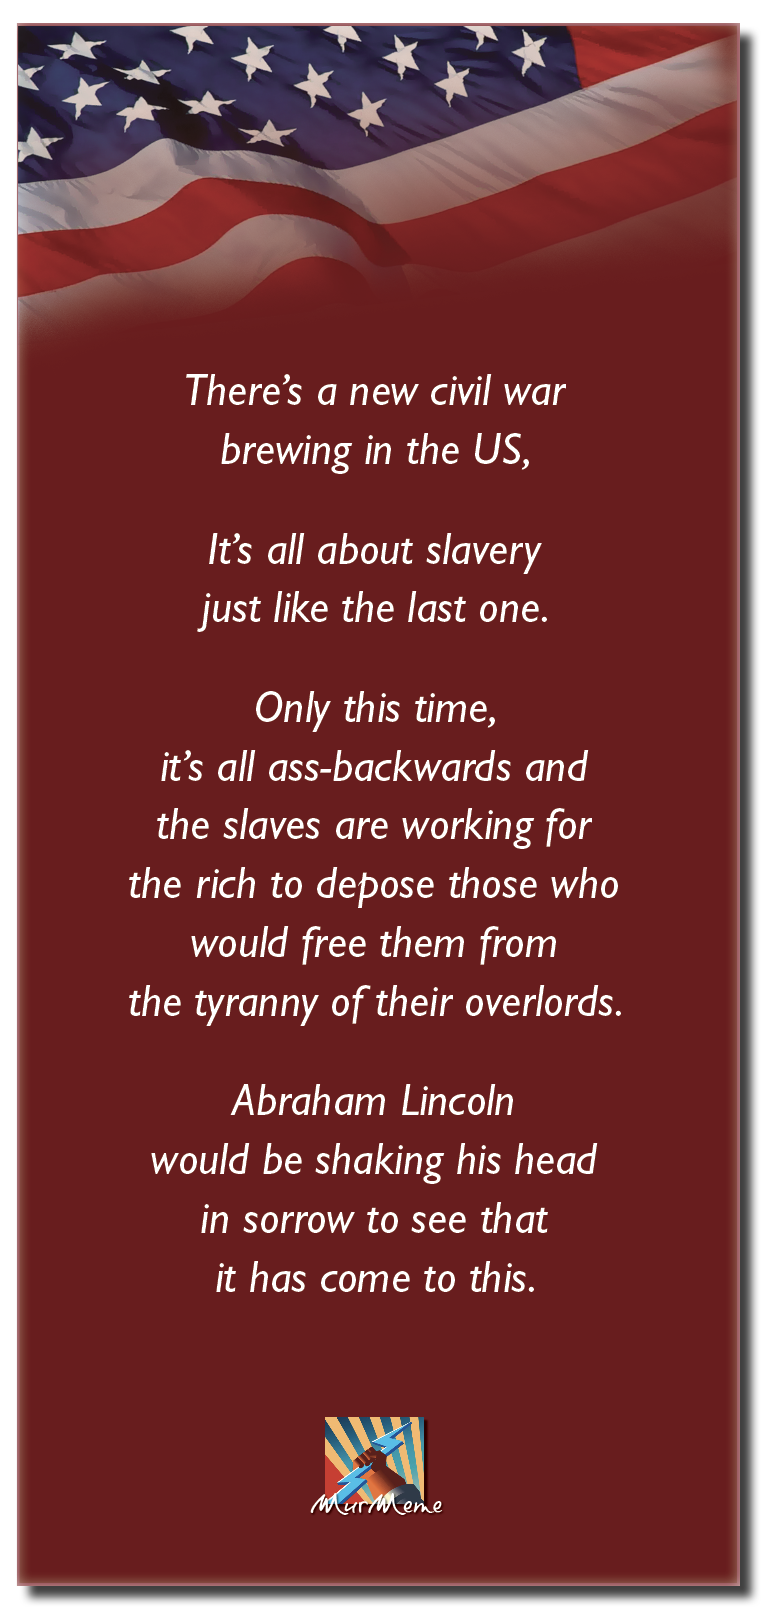 There’s a new civil war
brewing in the US,

It's all about slavery
just like the last one.

Only this time,
it’s all ass-backwards and

the slaves are working for
the rich to depose those who
would free them from
the tyranny of their overlords.

Abraham Lincoln
would be shaking his head
in sorrow to see that
it has come to this.

Px

ene